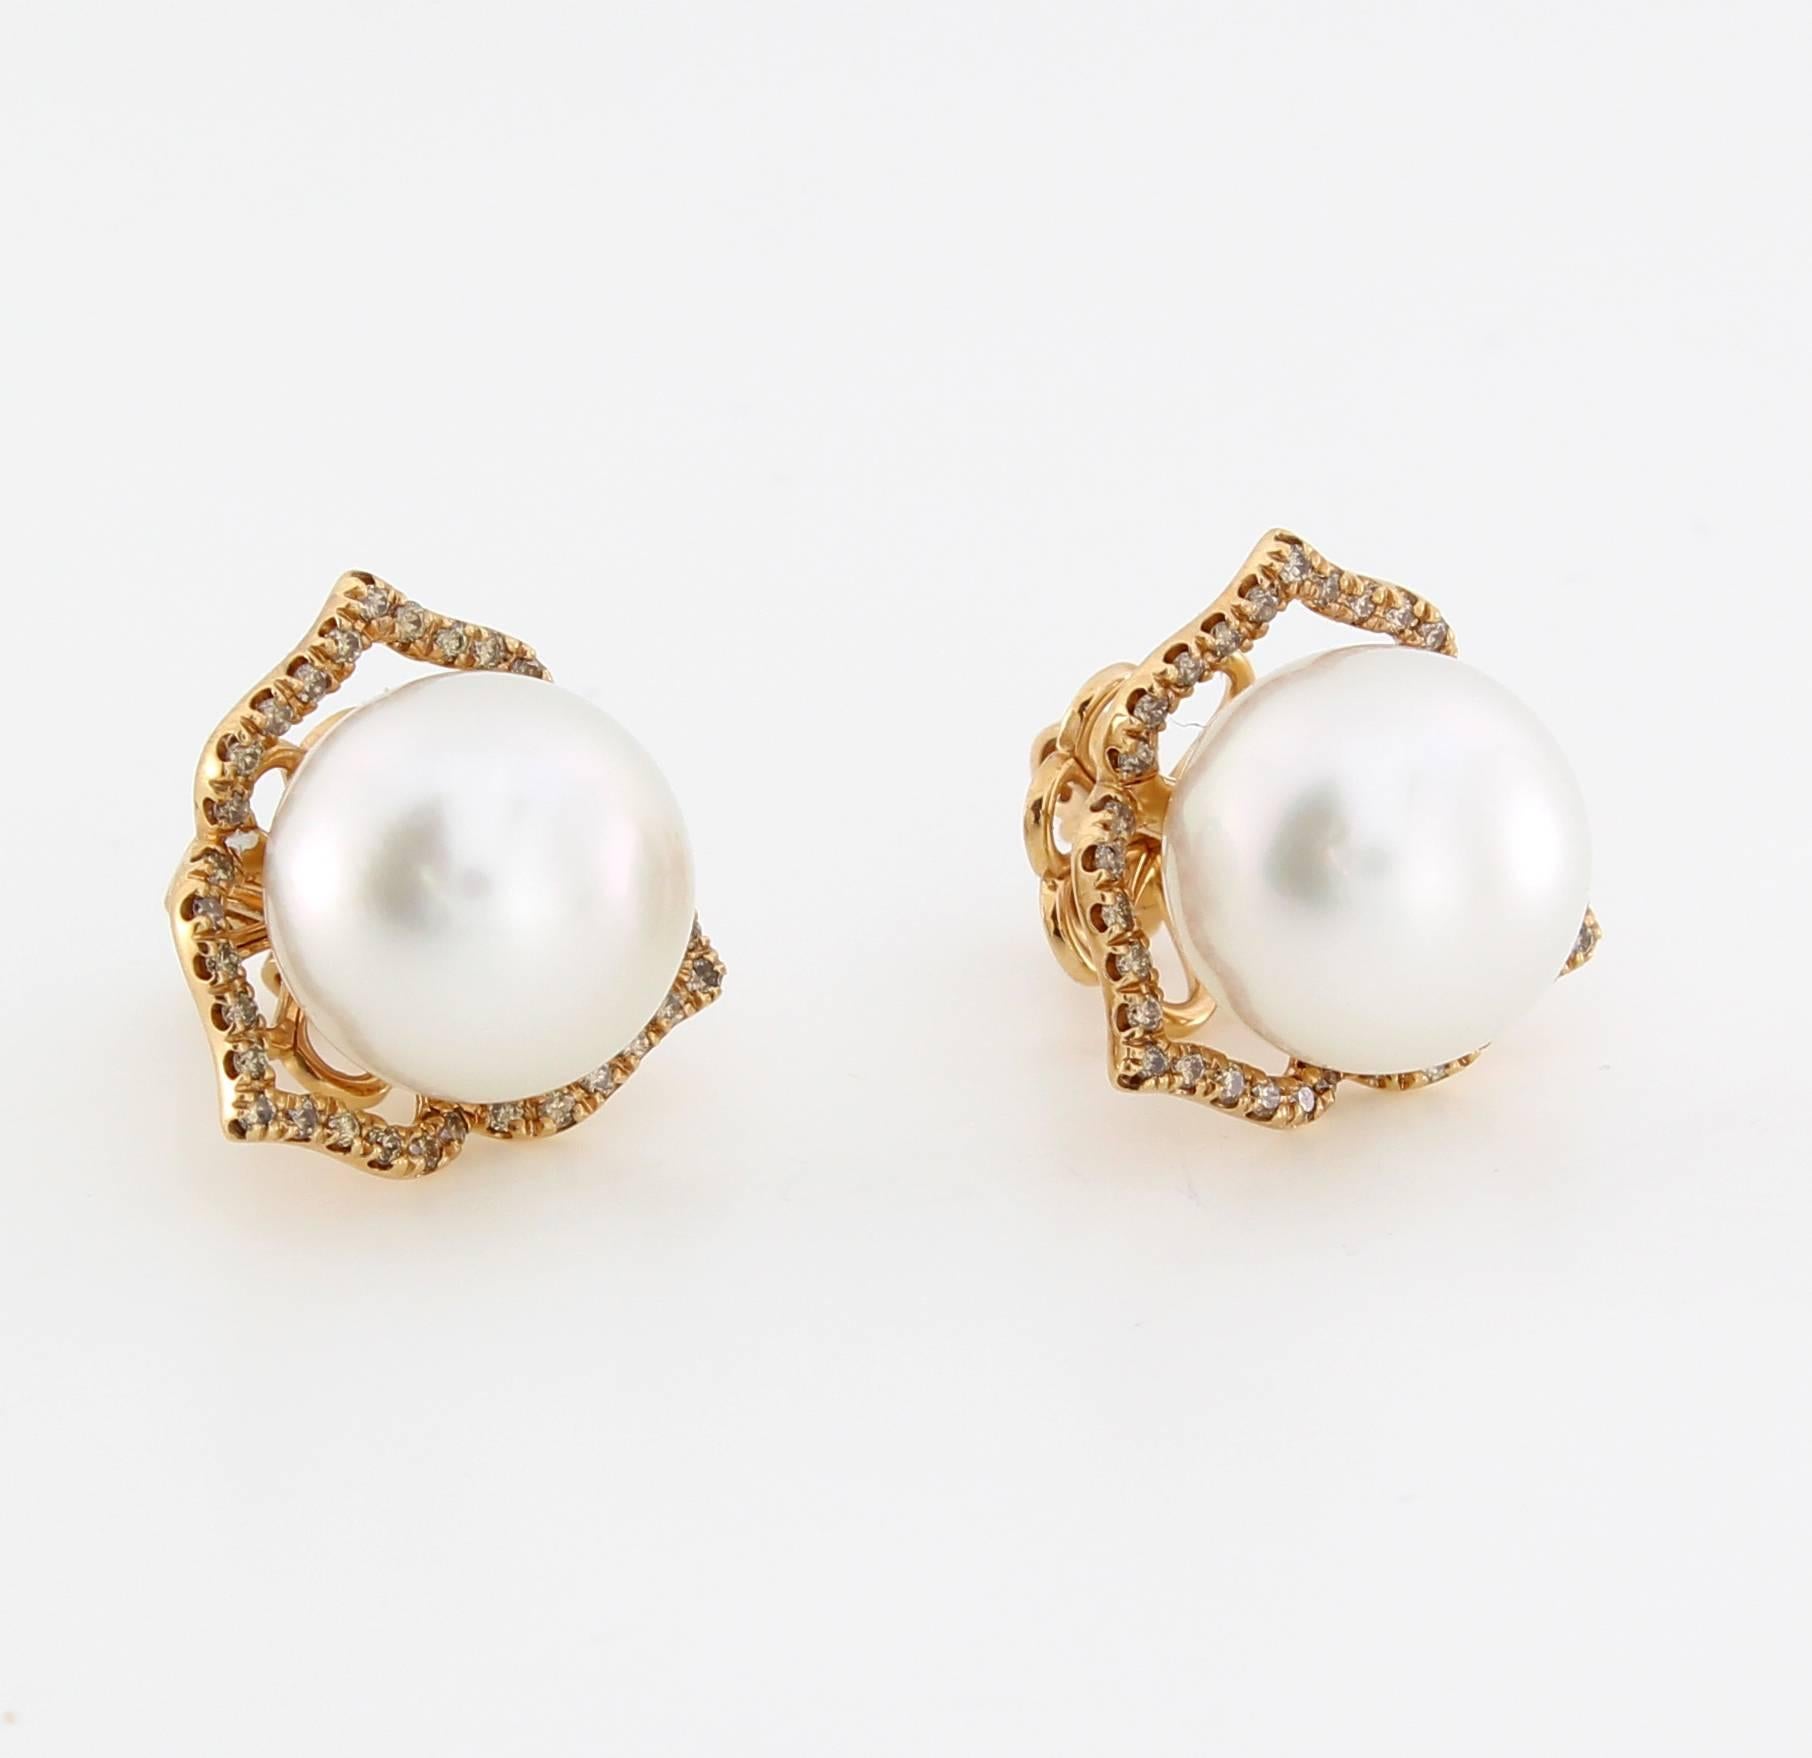 The 3 Point Stud Earrings are from the AUTORE Timeless Collection.
This piece is crafted in 18k Rose Gold with Brown Diamonds ( 0.6ct Brilliant Cut) with 12mm Round/Near Round White South Sea Pearls. 